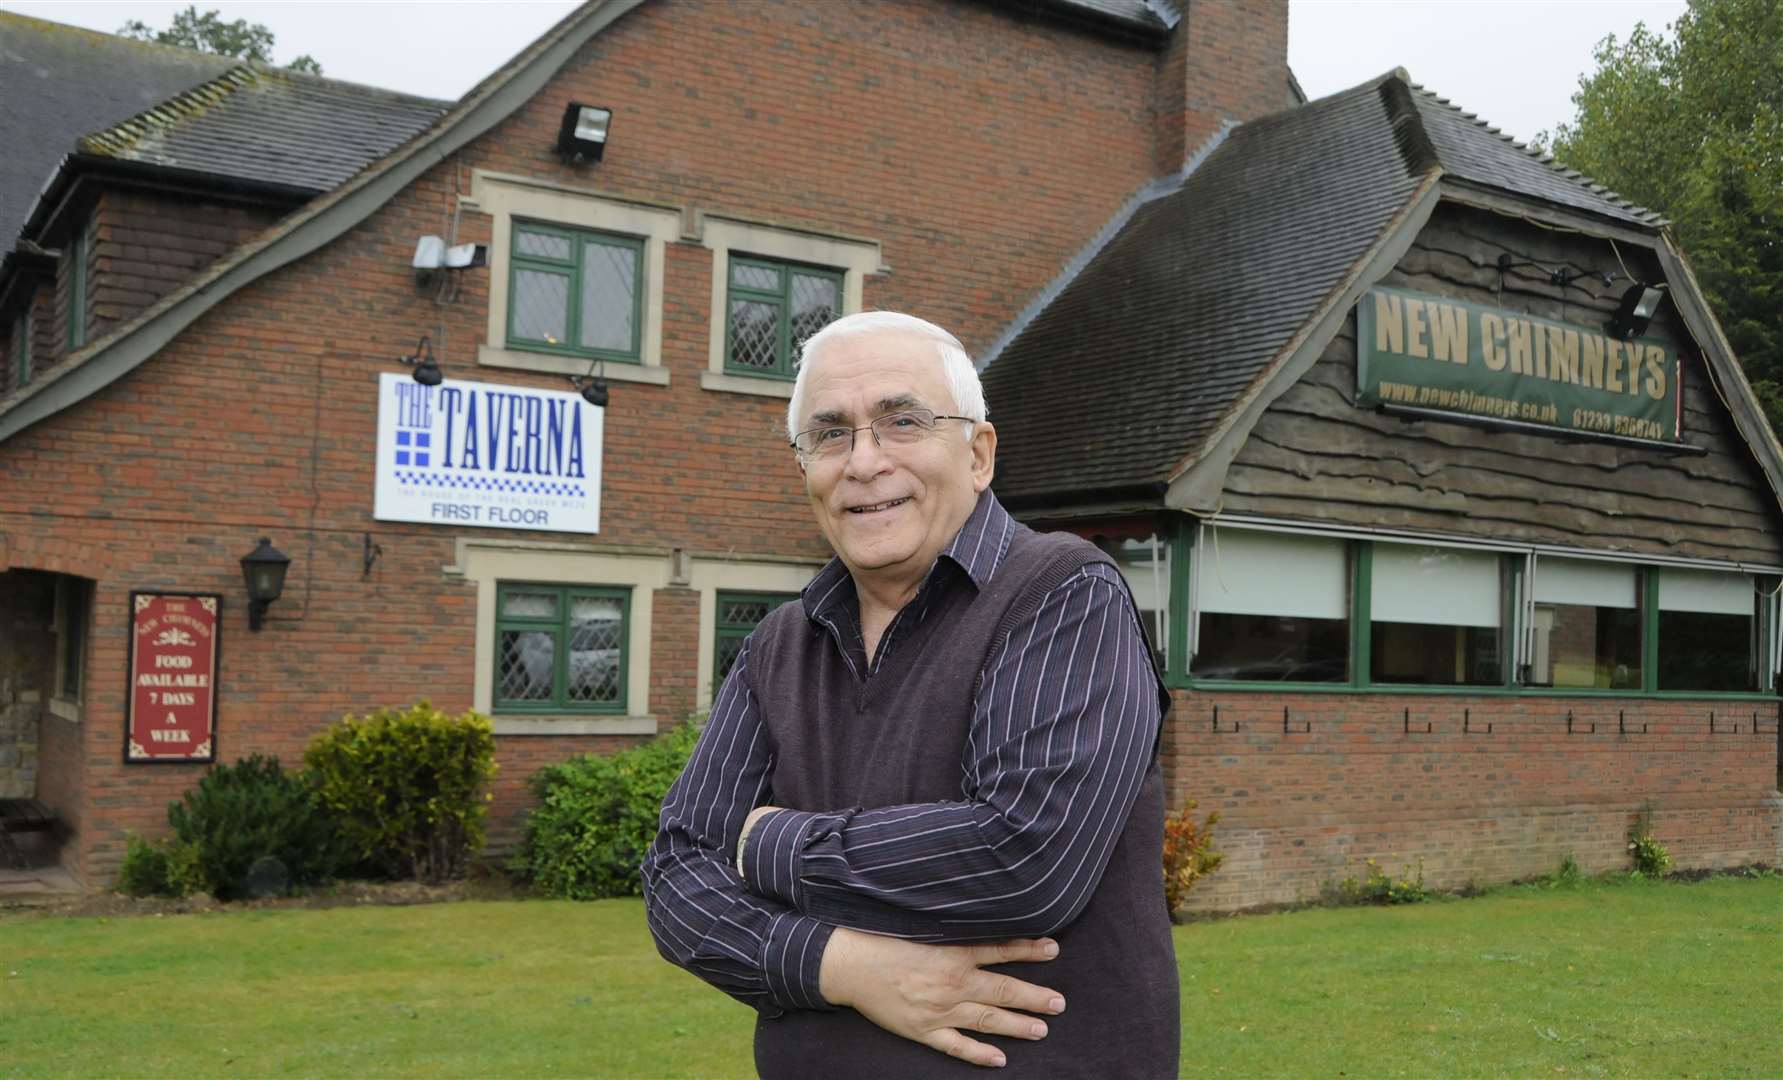 The pub was previously owned by Costas Constanti